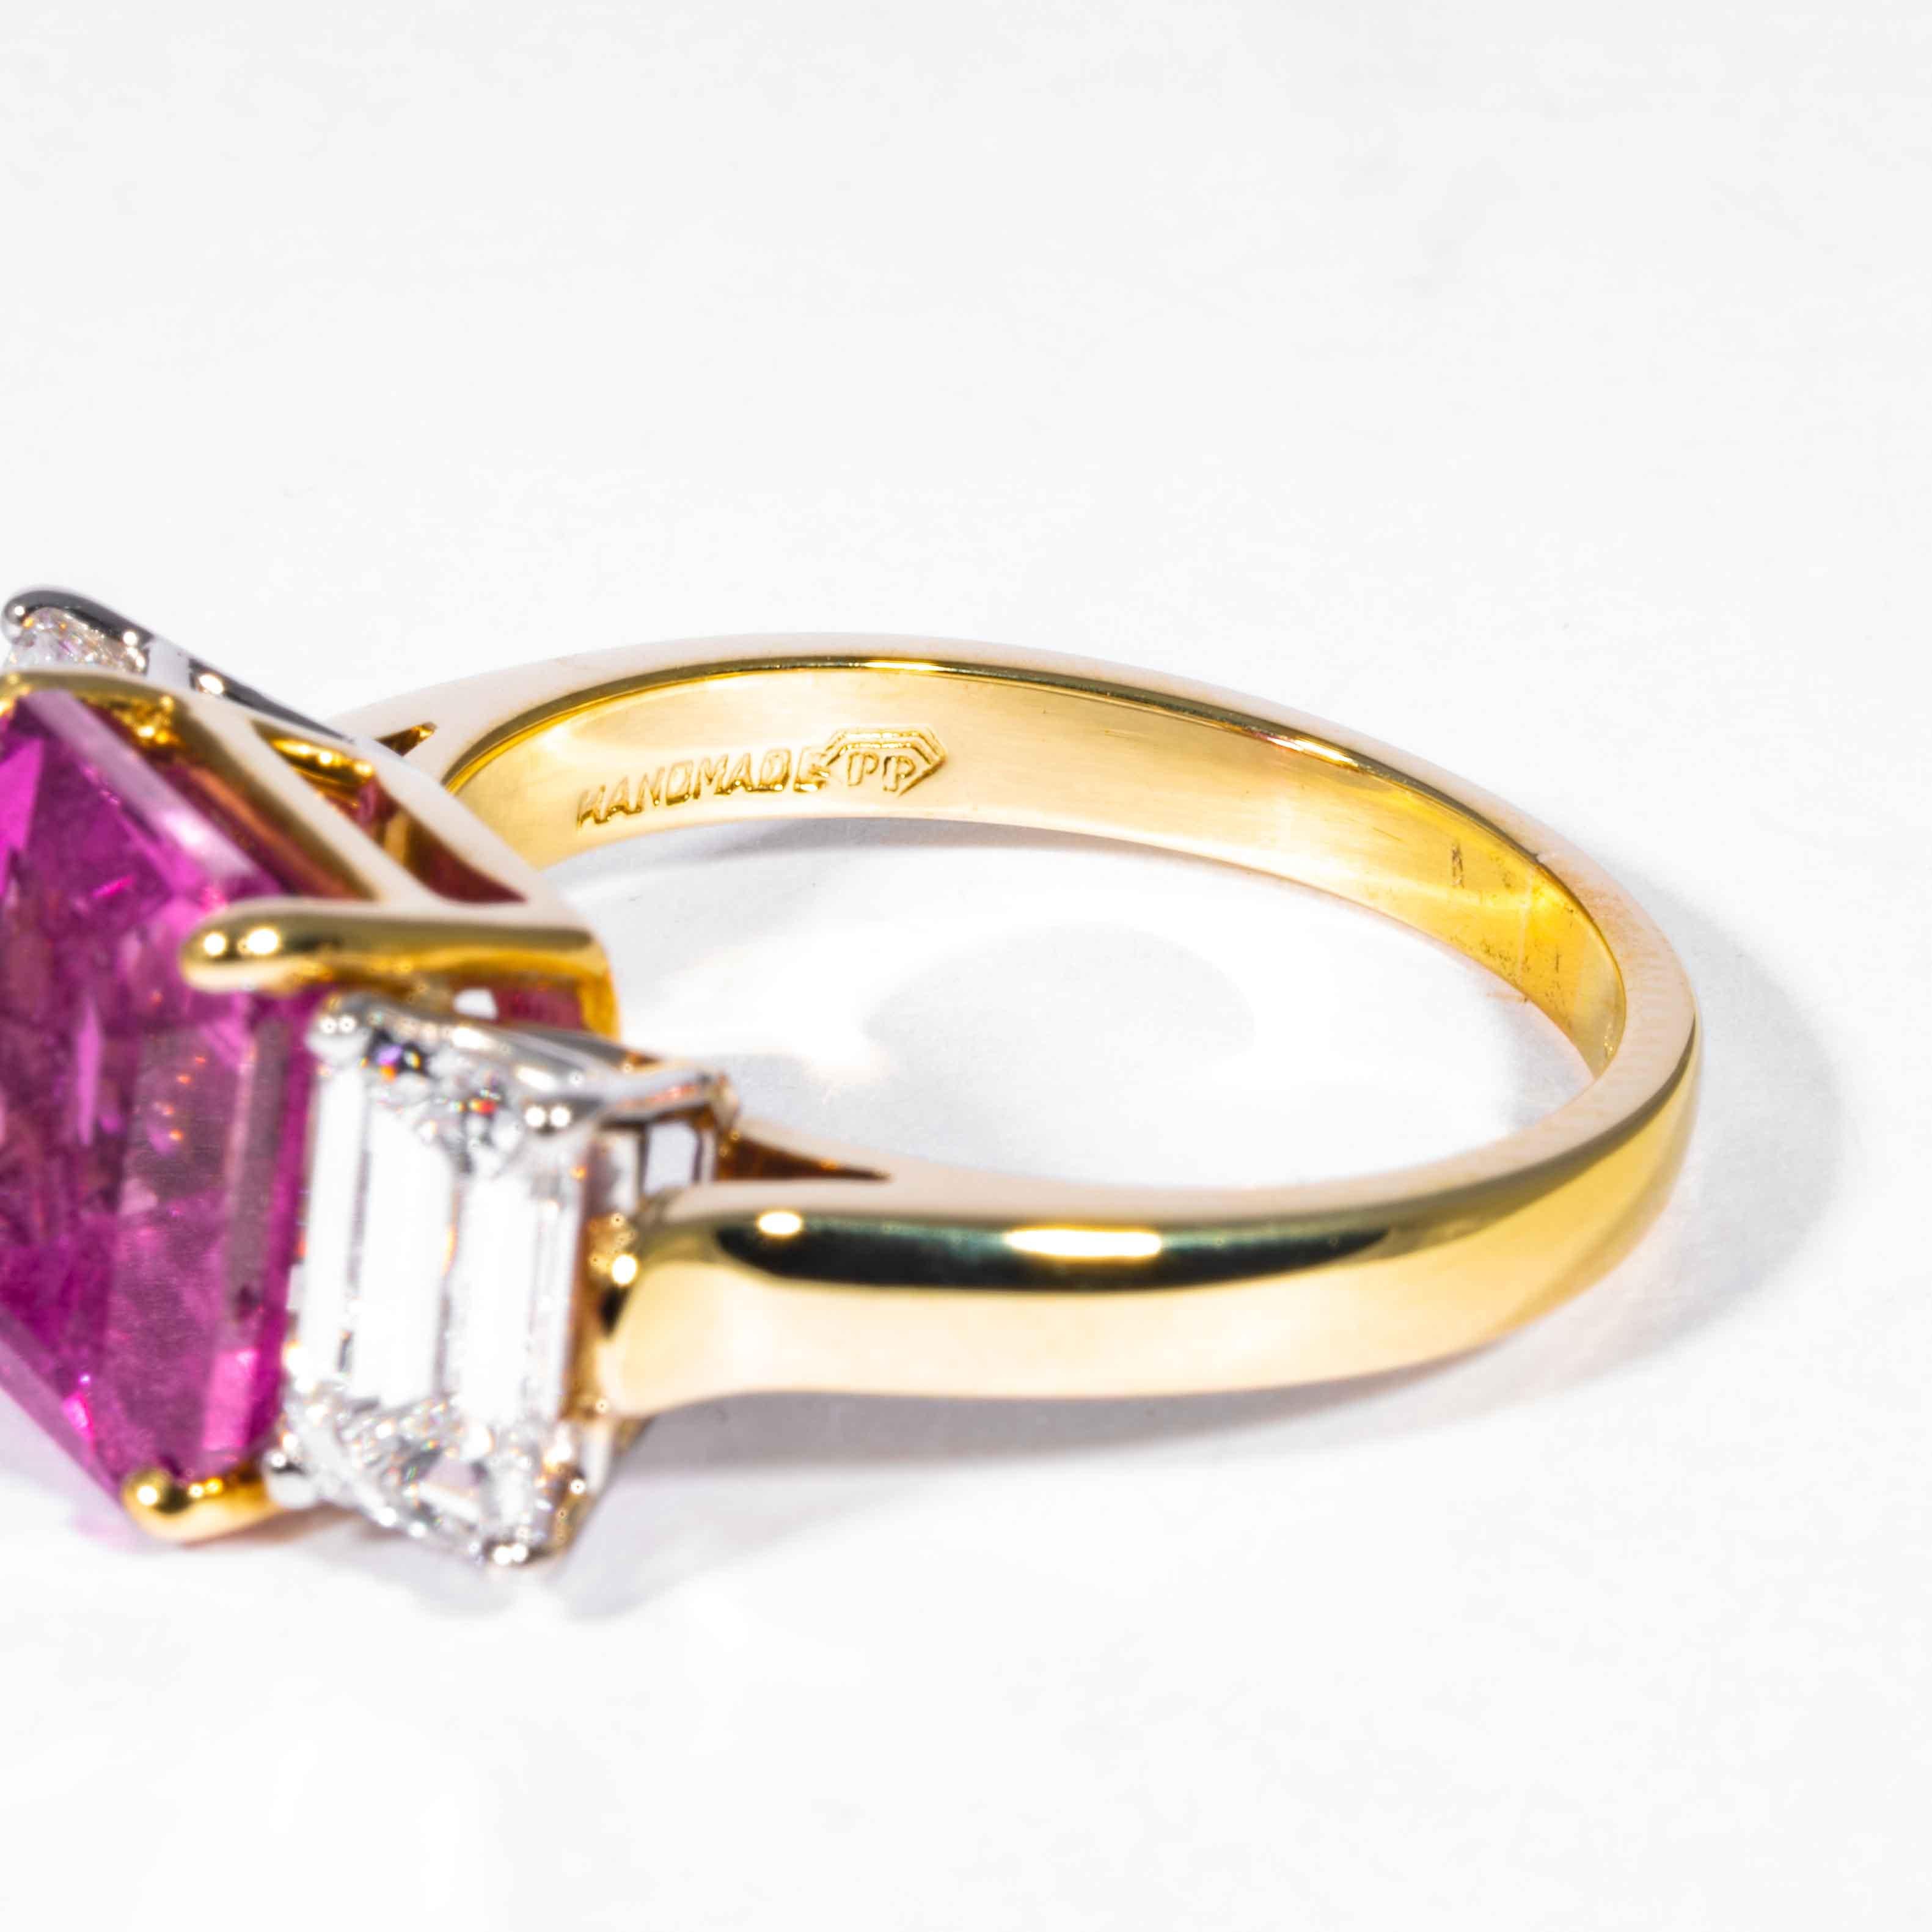 Shreve, Crump & Low 6.13 Carat GIA Certified Pink Sapphire and Diamond Ring 1